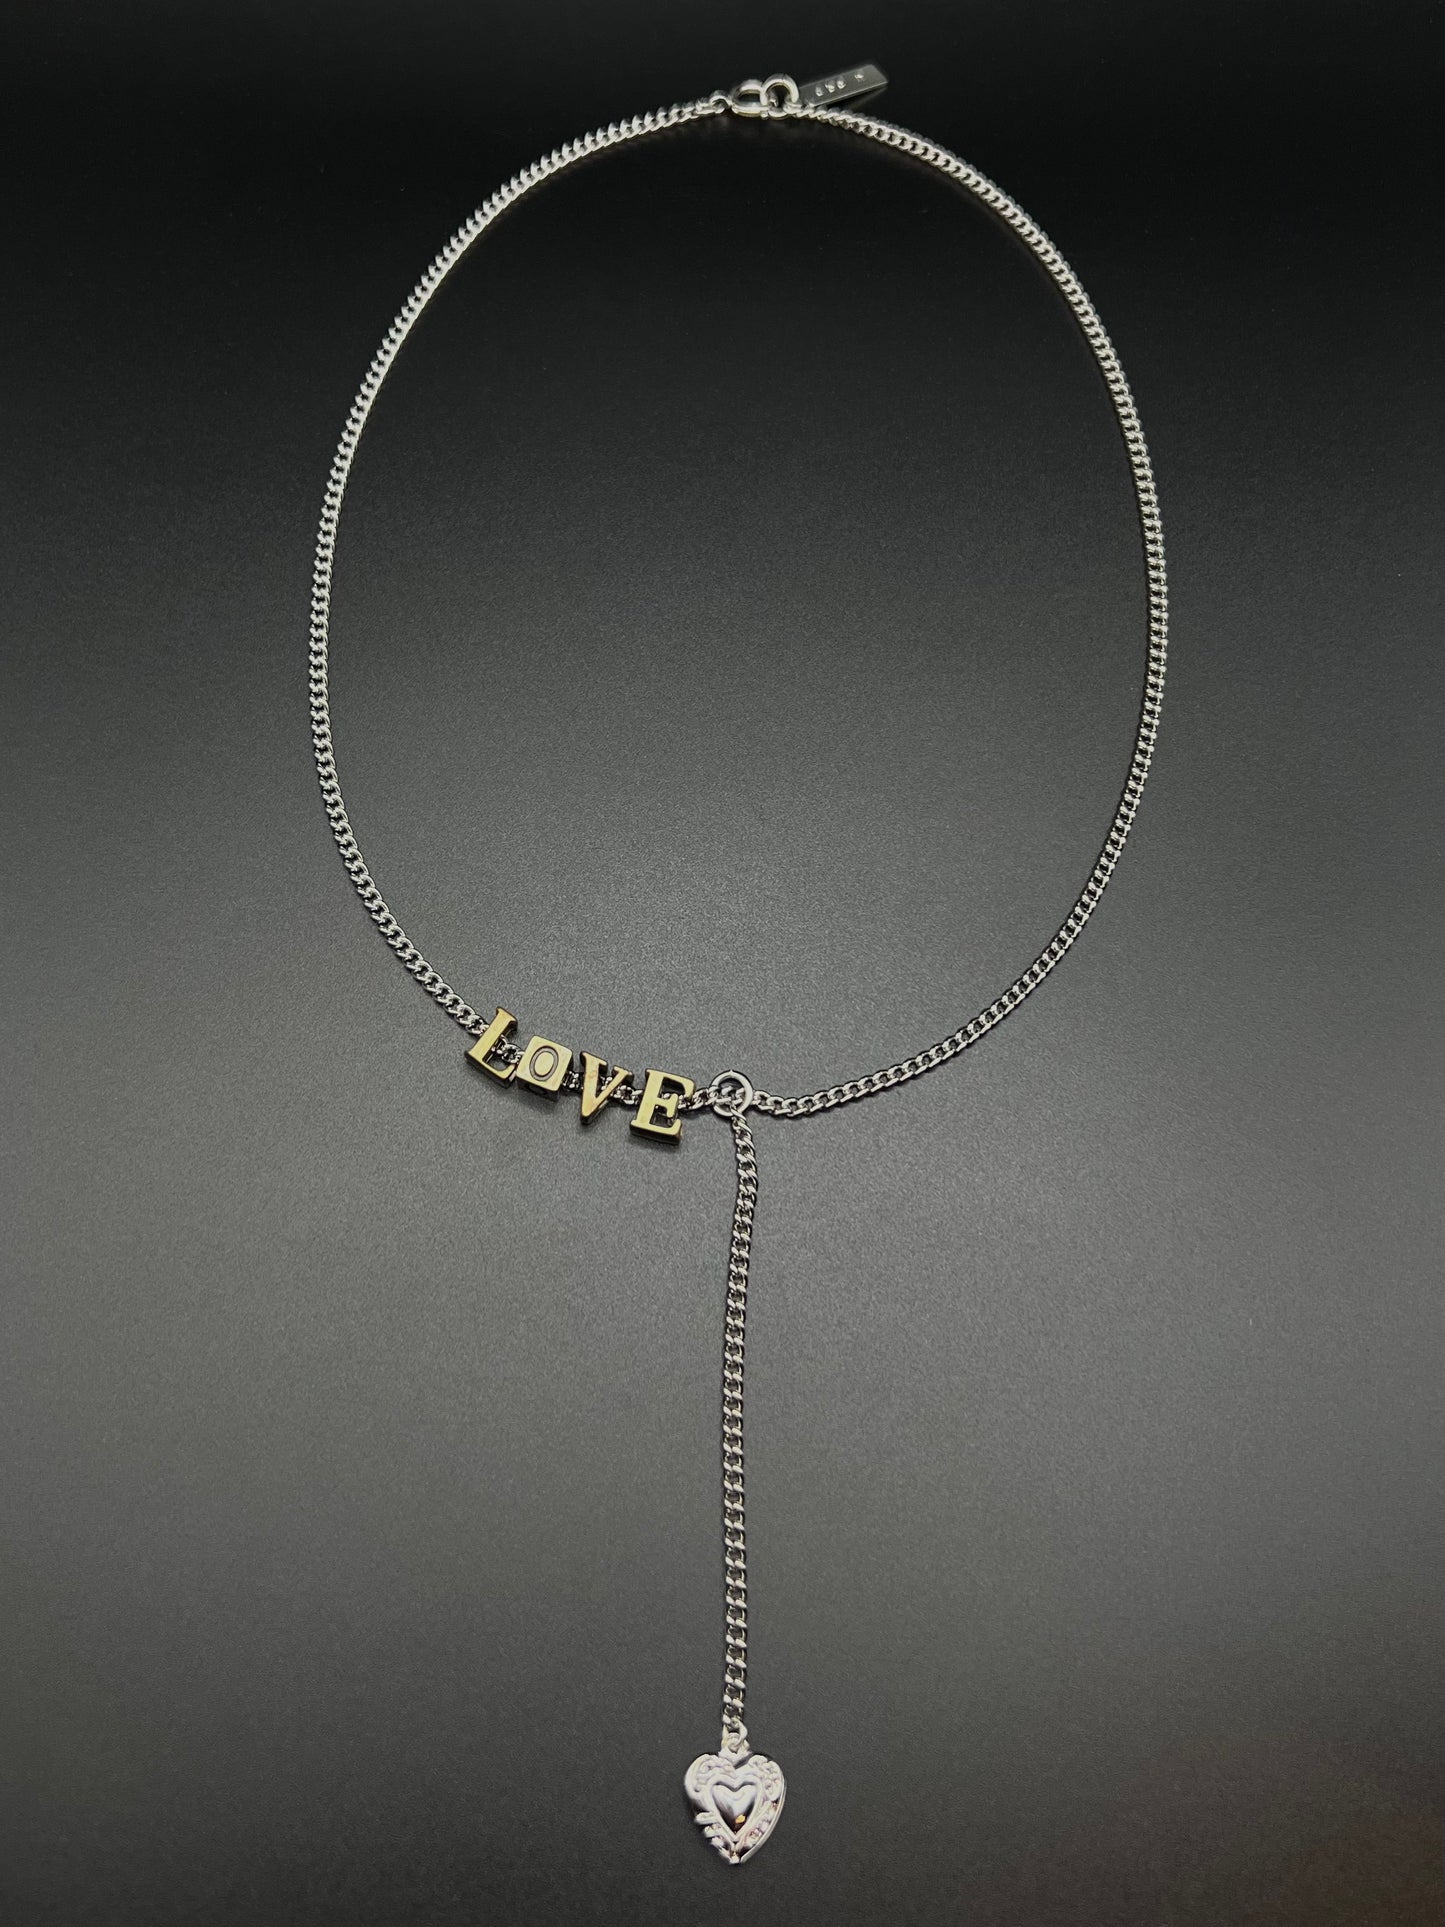 "LOVE" necklace